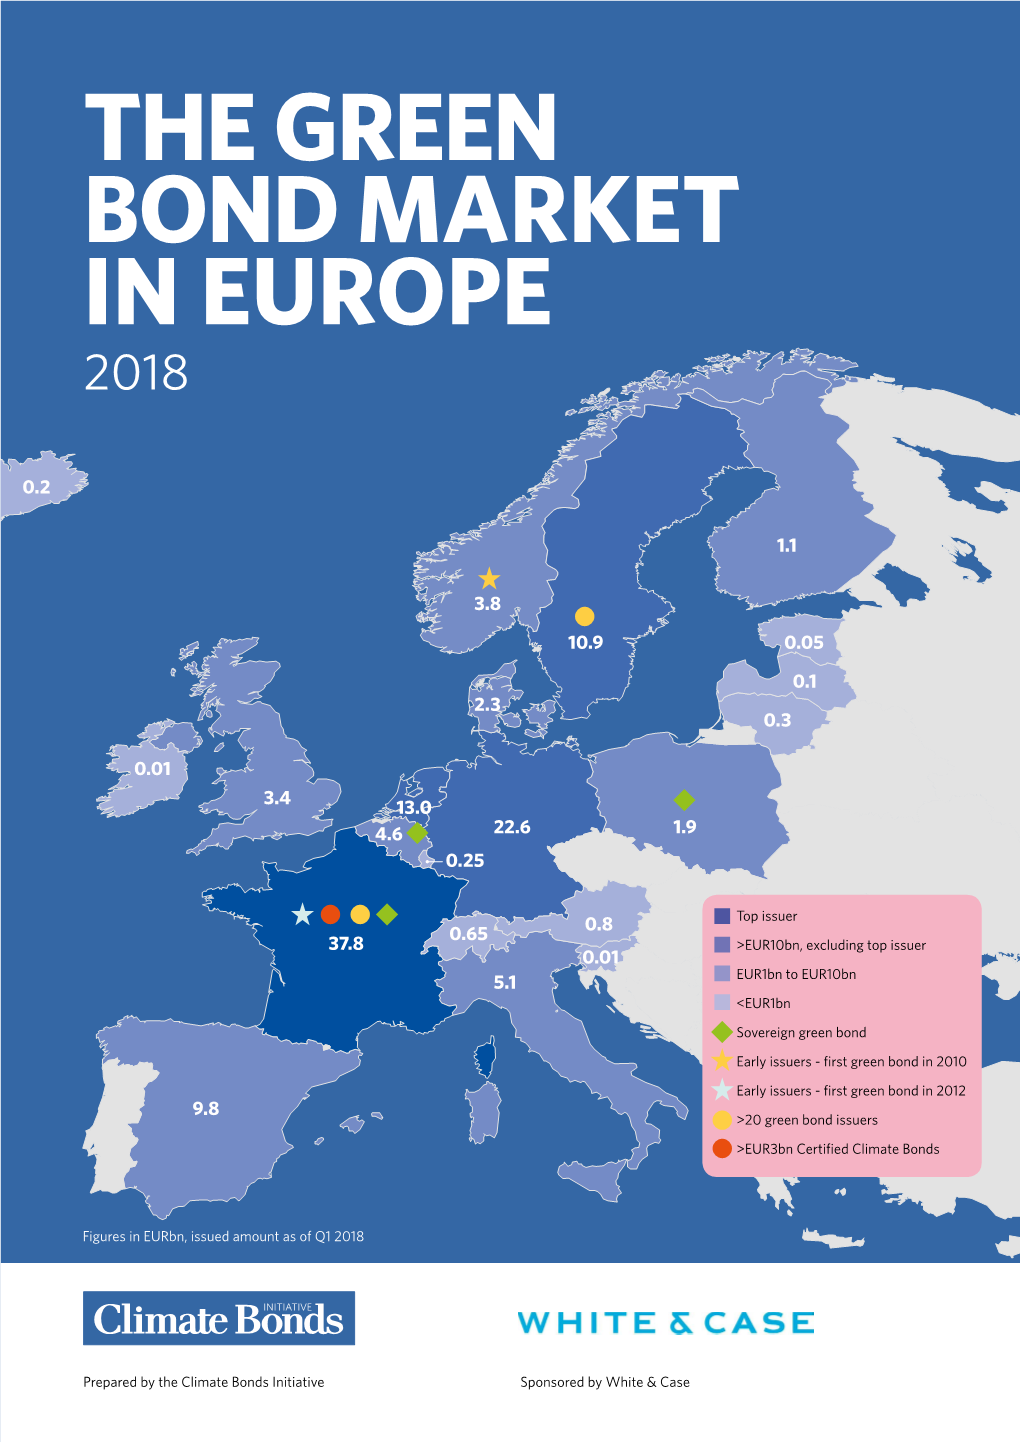 The Green Bond Market in Europe 2018